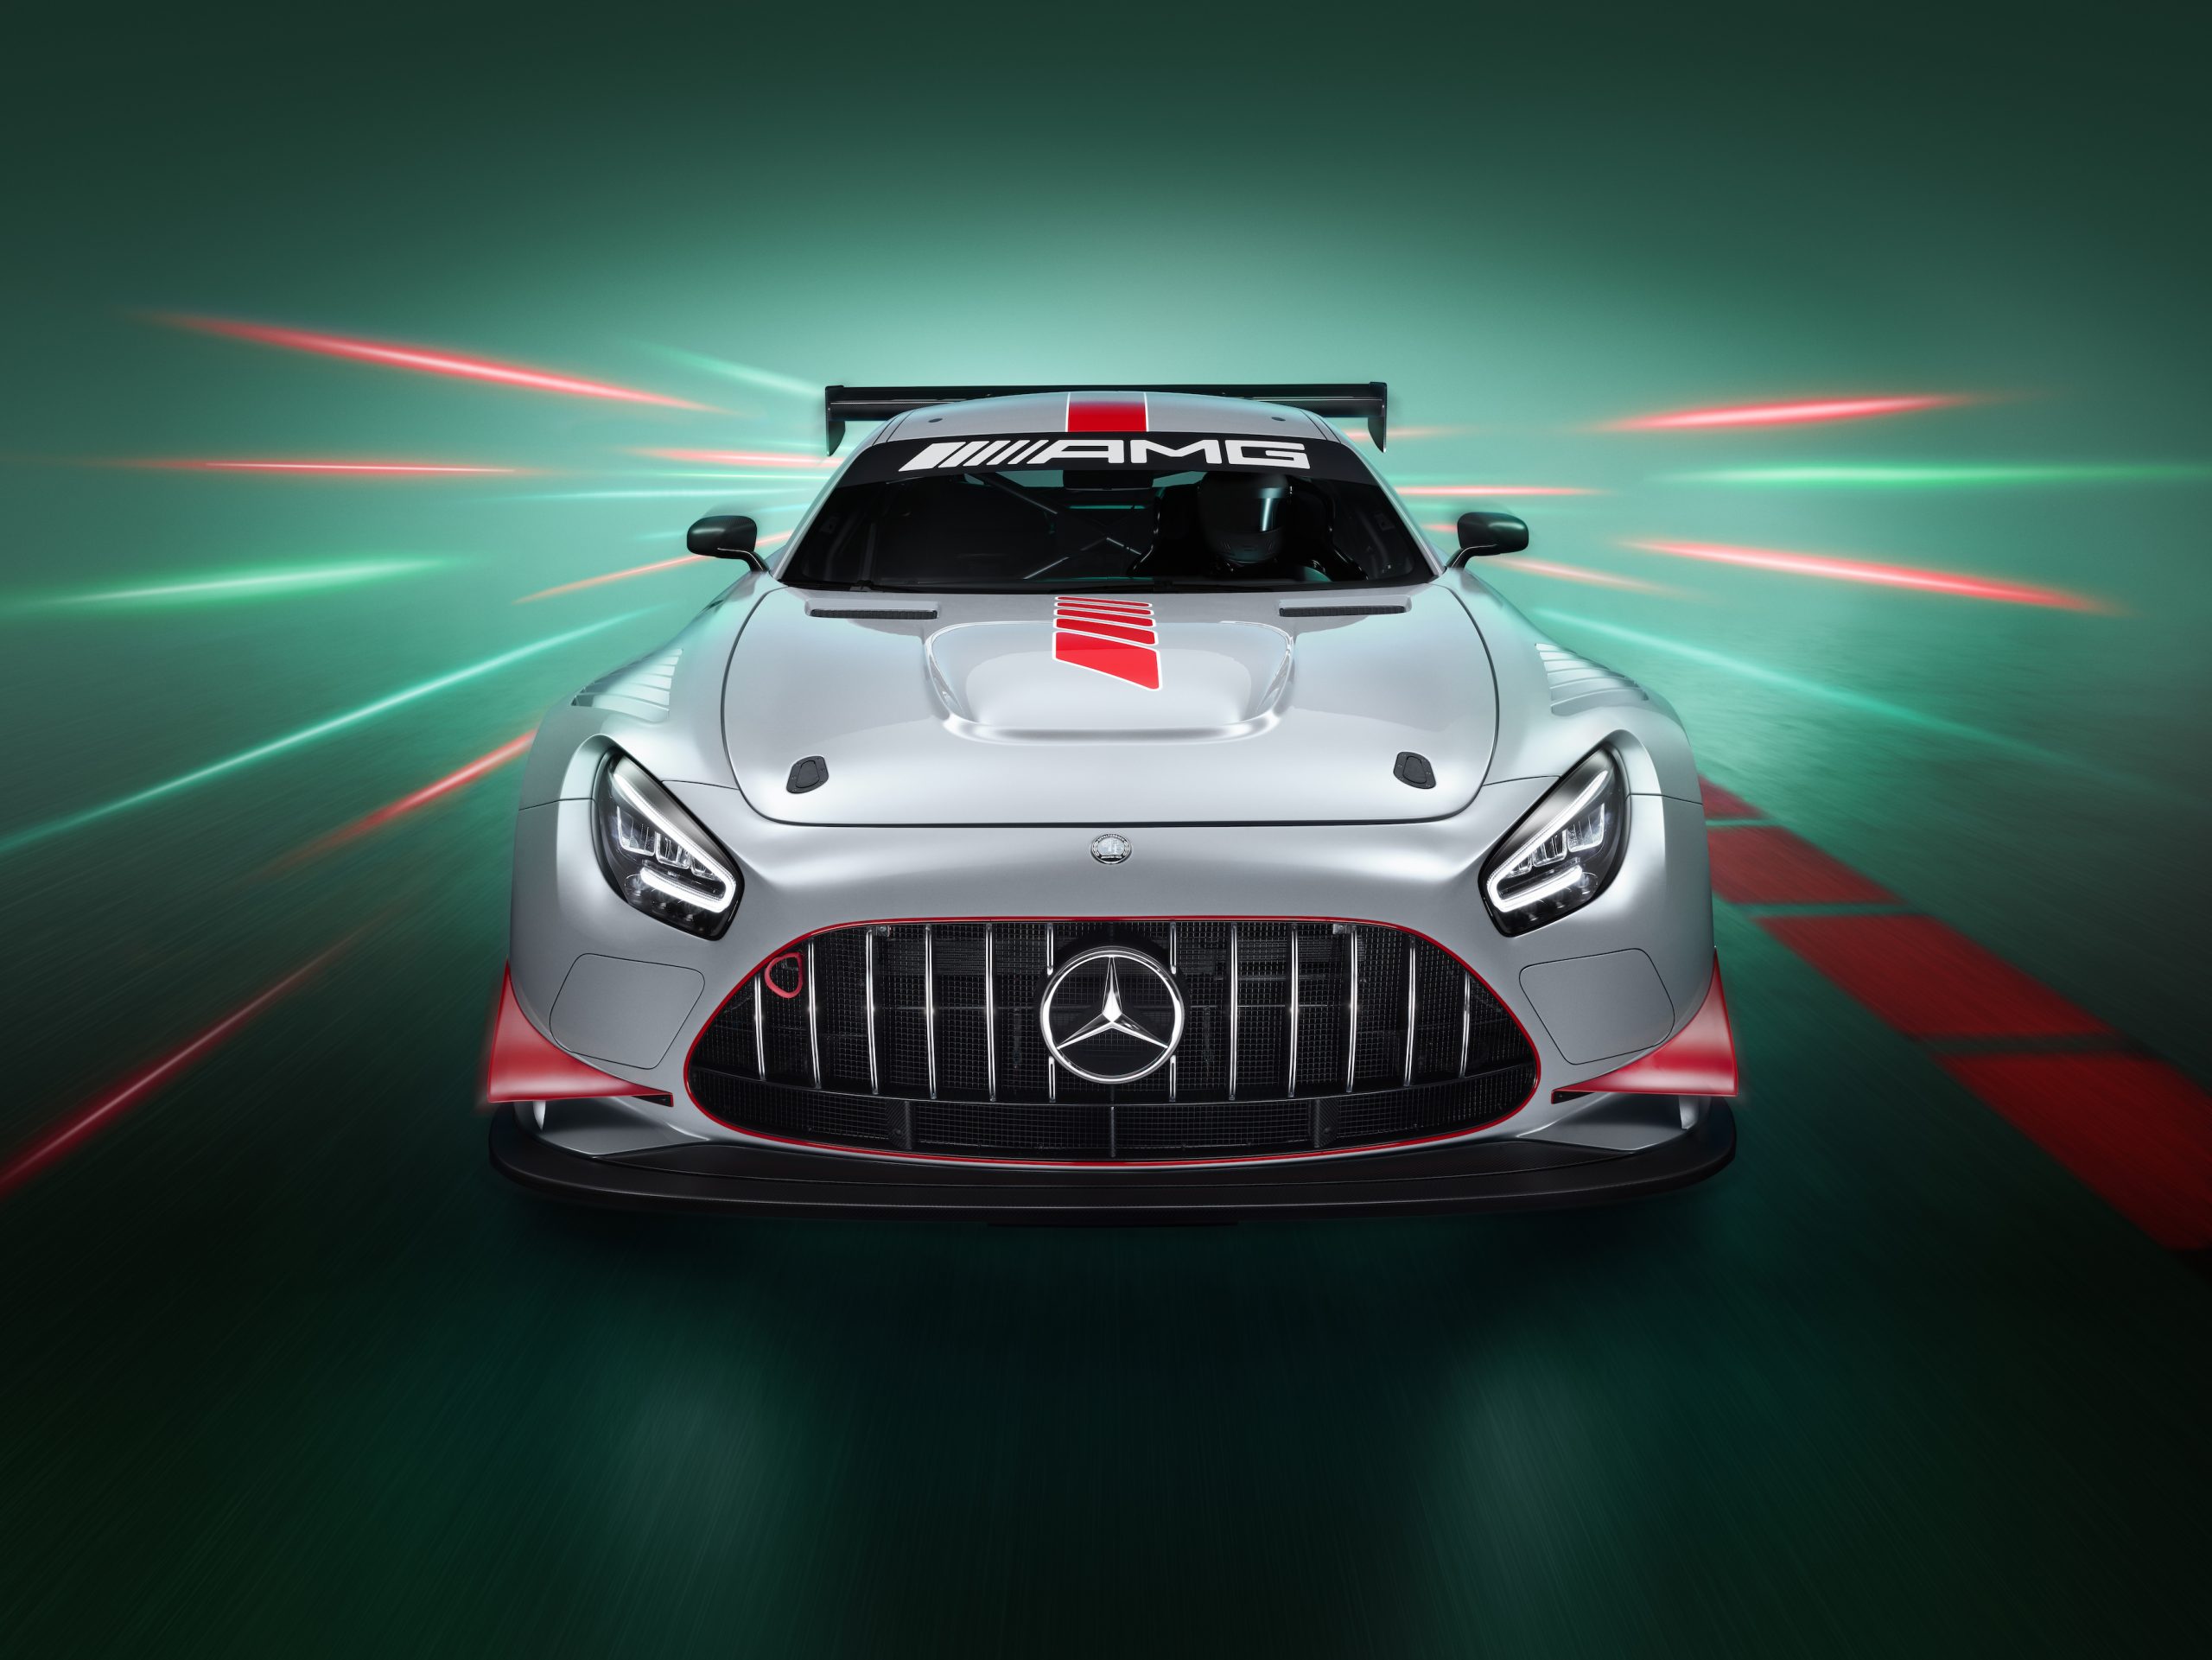 A Limited Edition IWC Watch Comes Free With This Mercedes AMG GT3